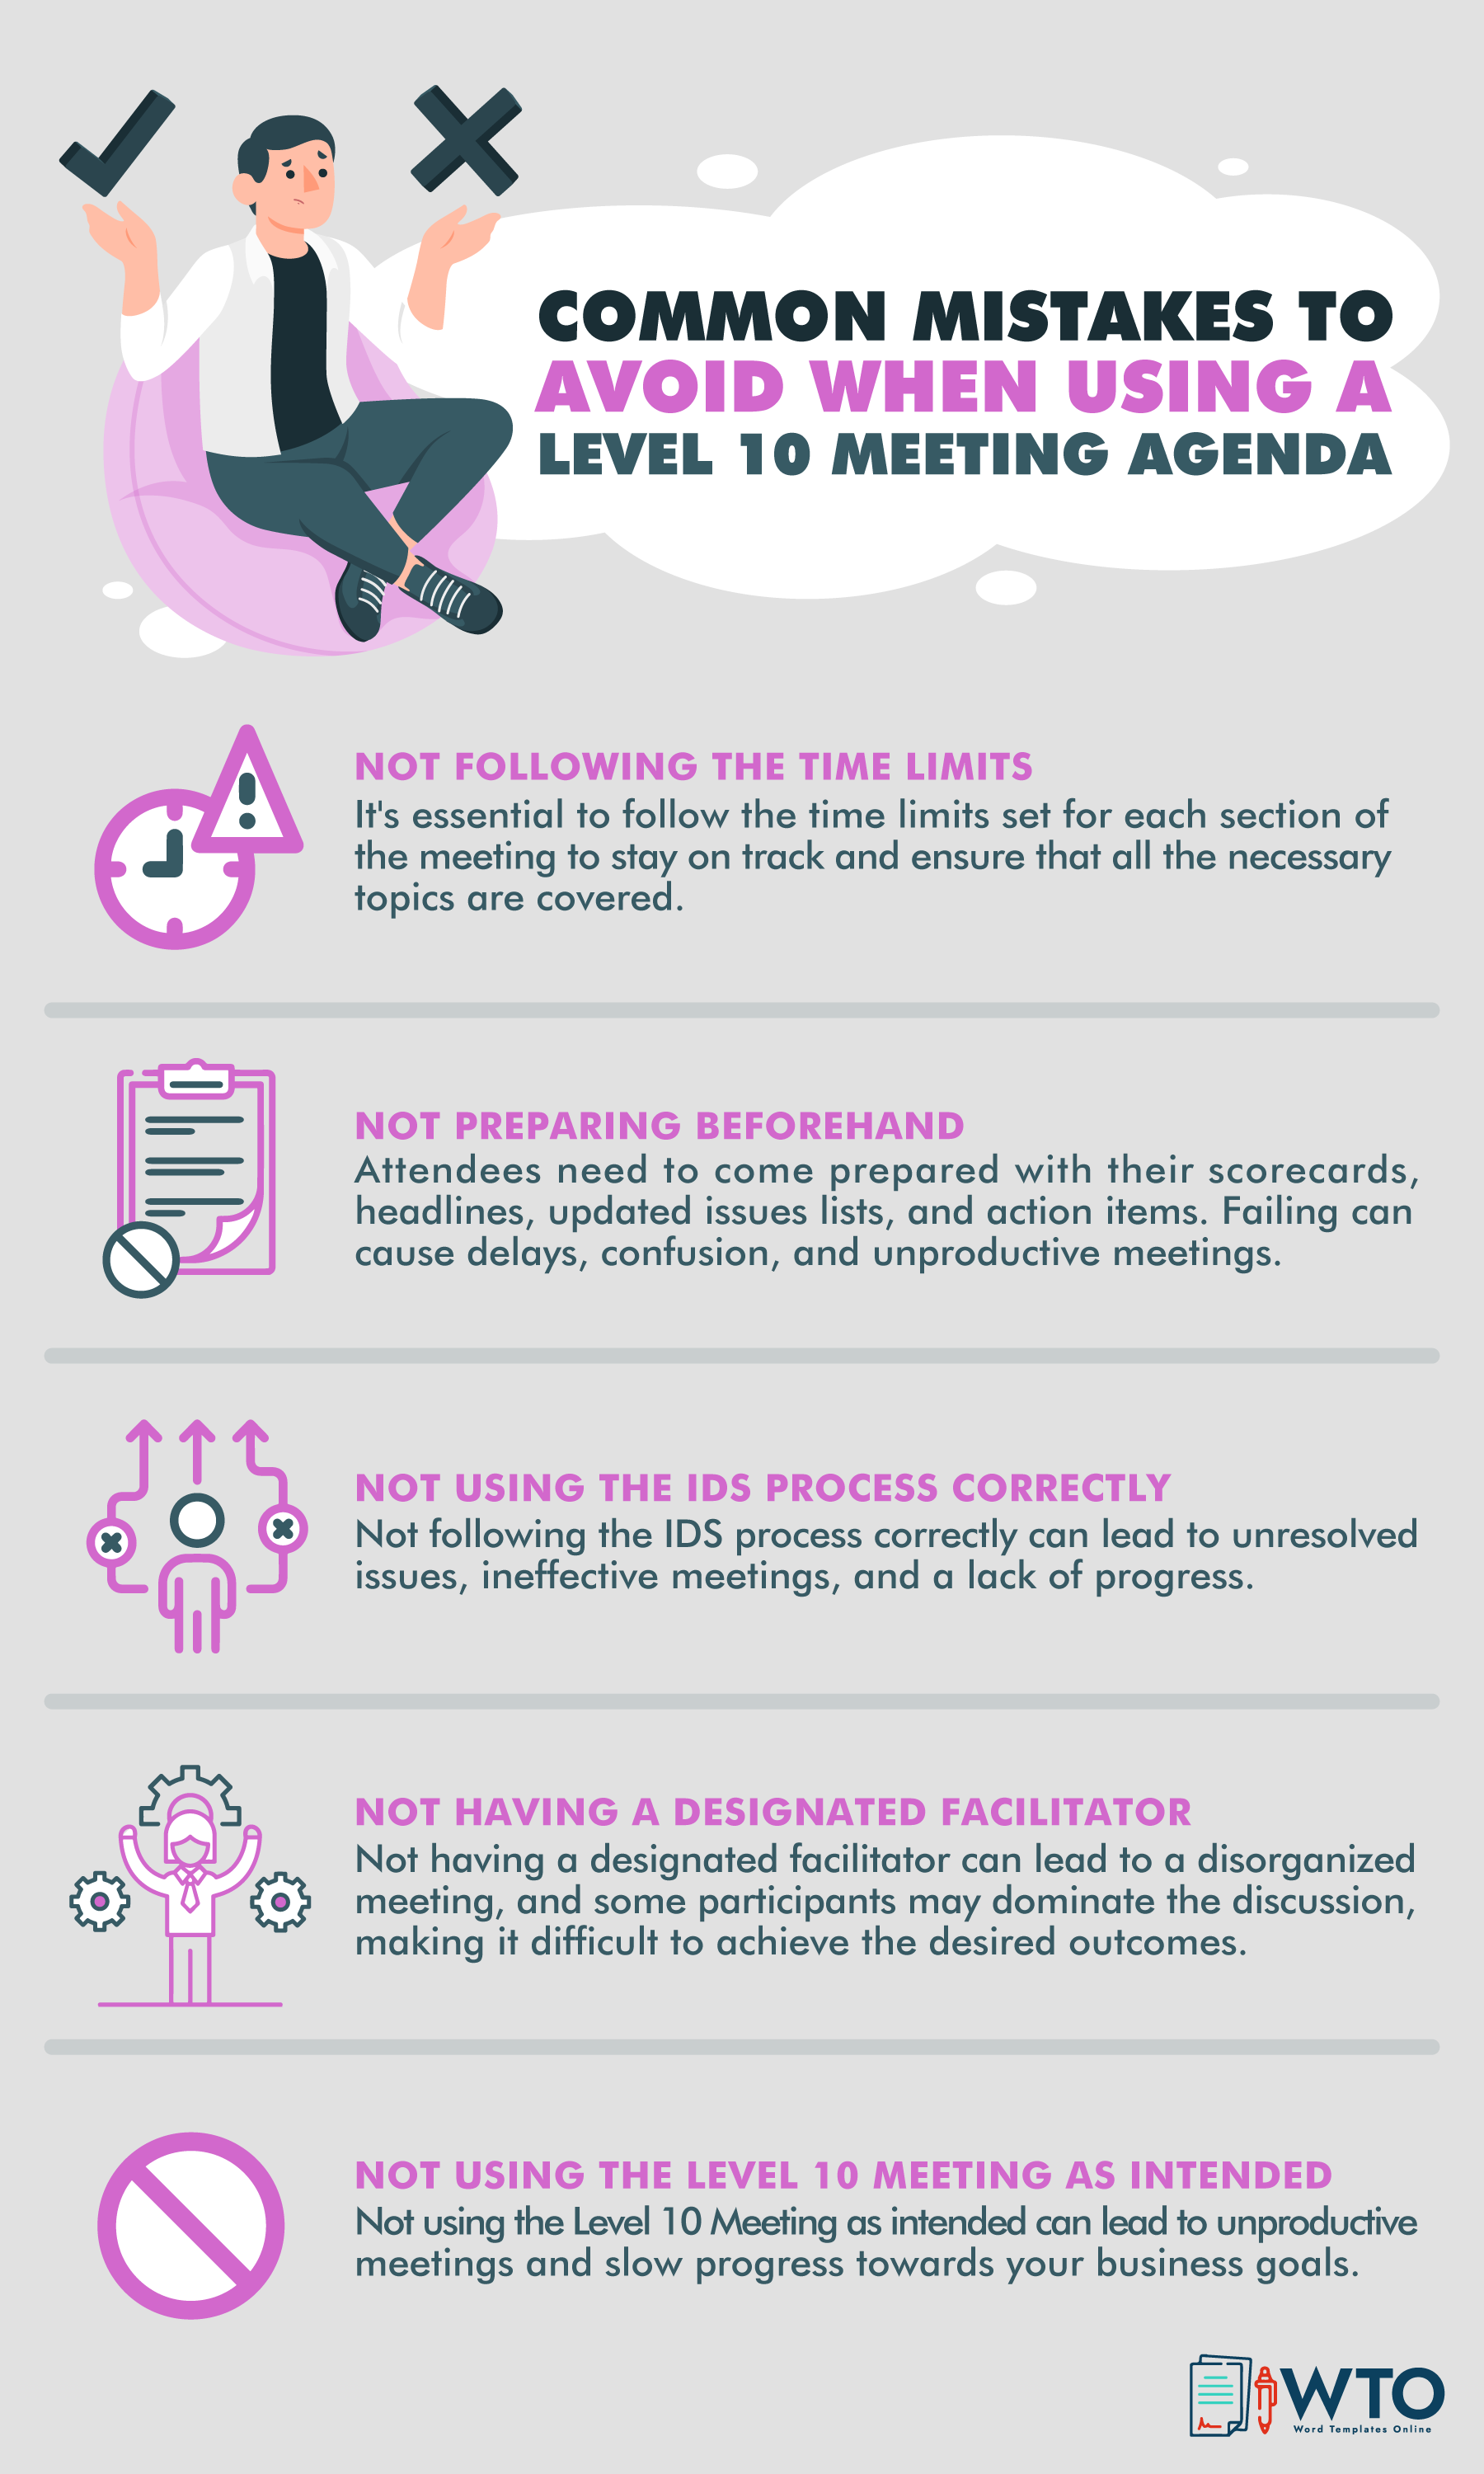 This infographic shows the common mistakes to avoid in using level-10 meeting agenda.